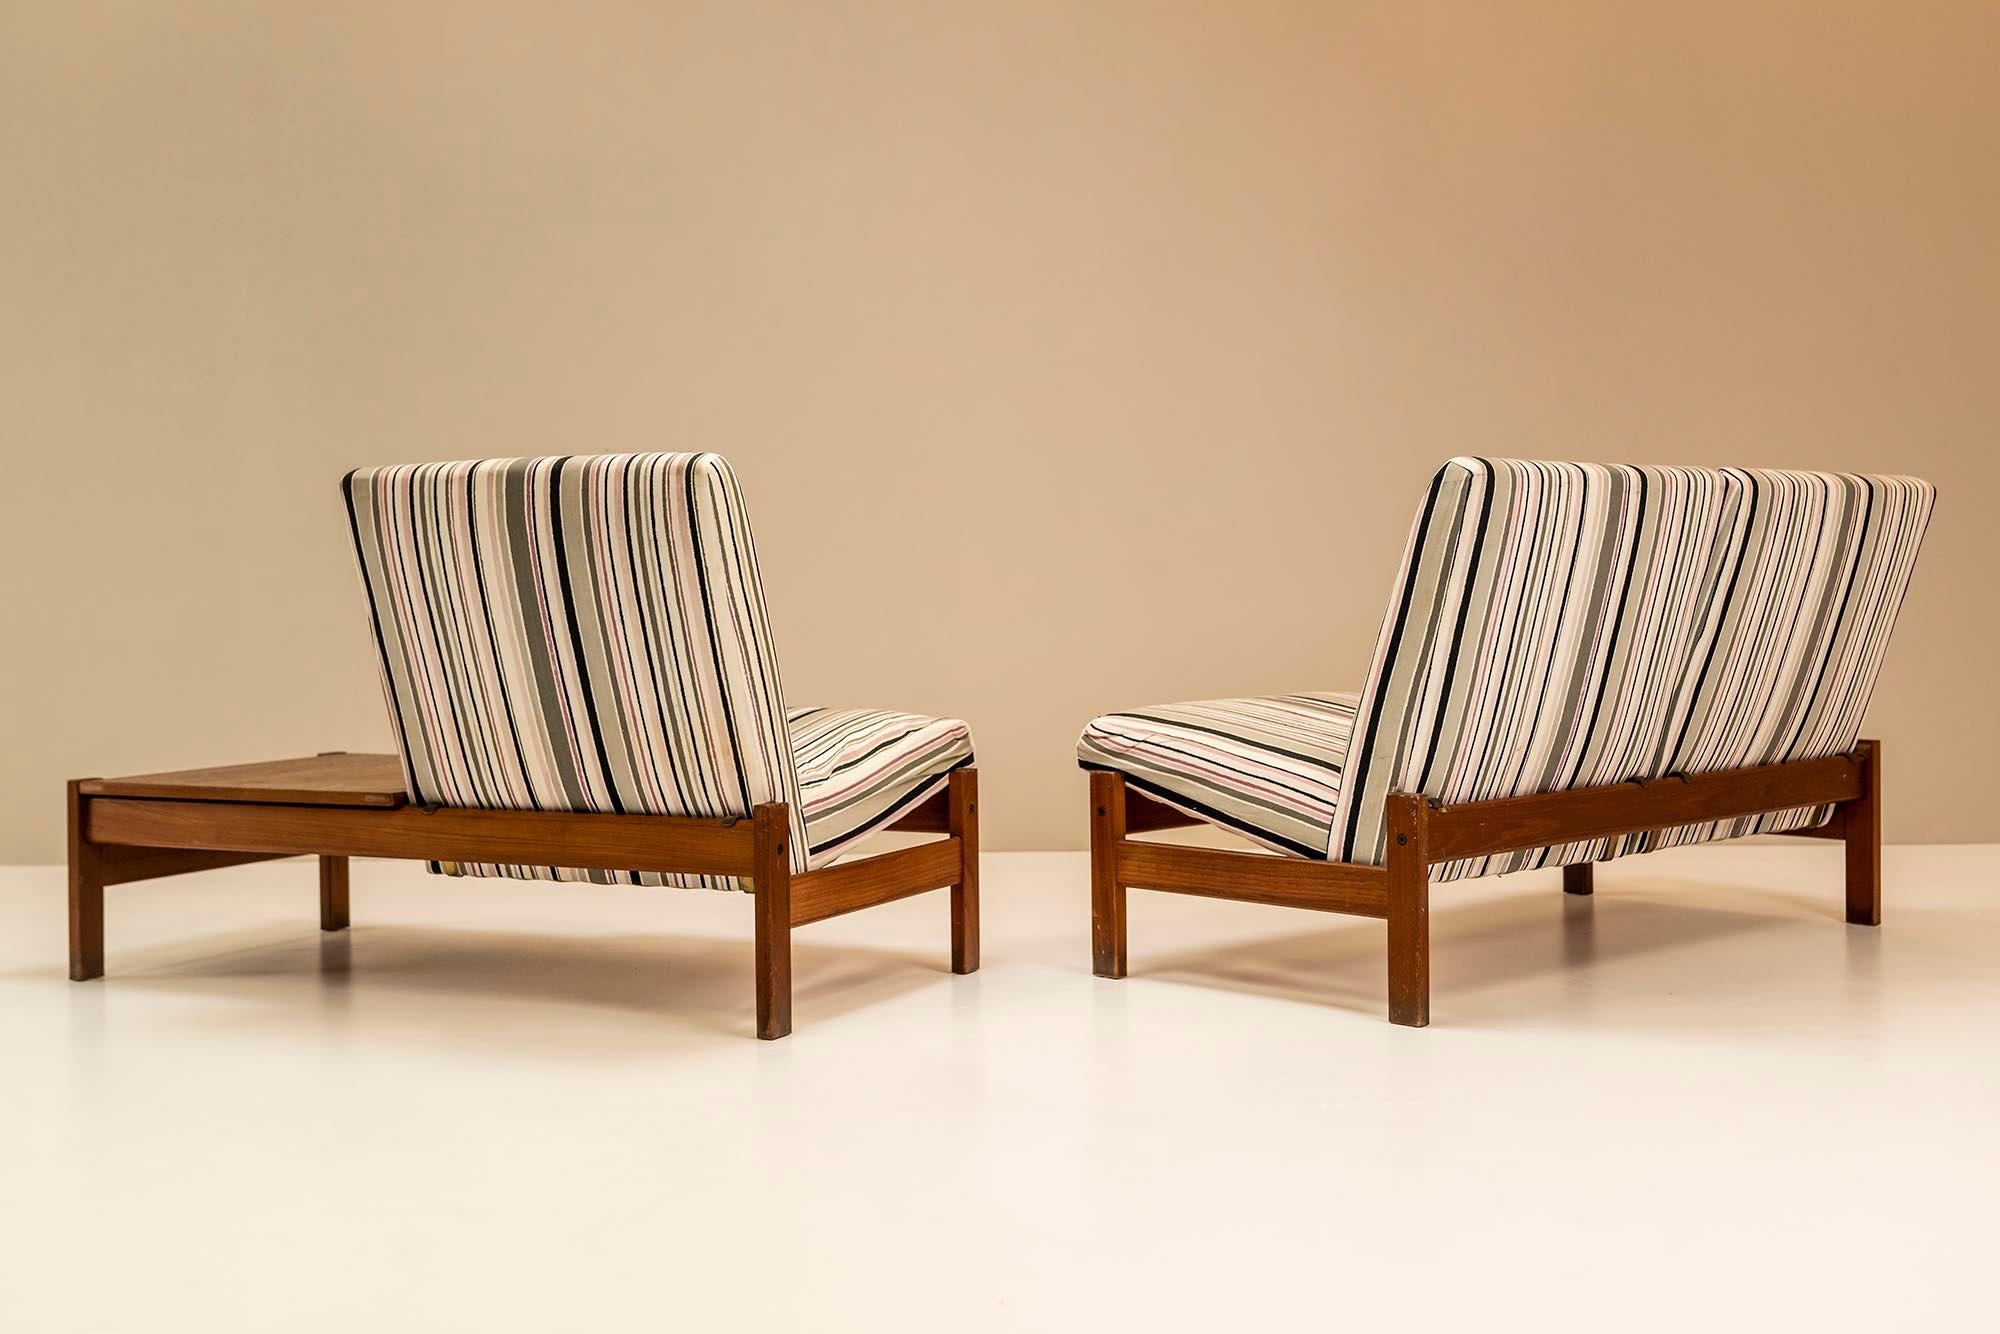 Modular Bench Set in Teak and Original Upholstery, Italy, 1960s In Good Condition For Sale In Hellouw, NL